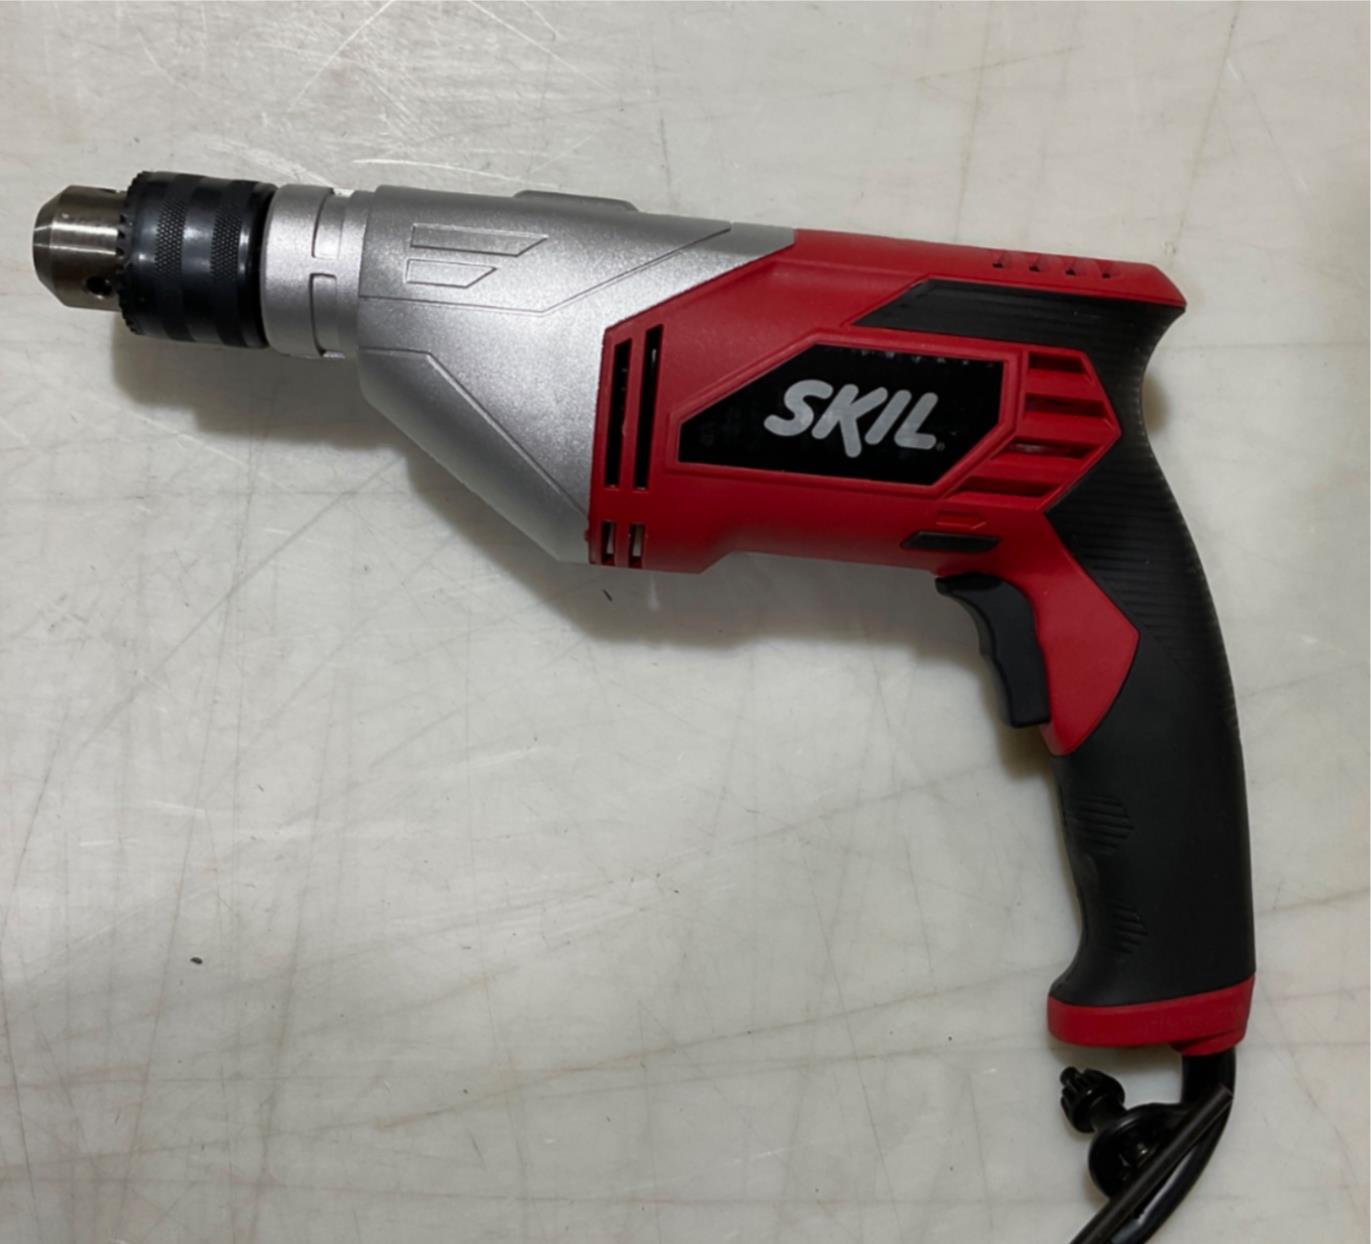 Skil 6335-01 7.0-Amps Corded 1/2-Inch Drill #11